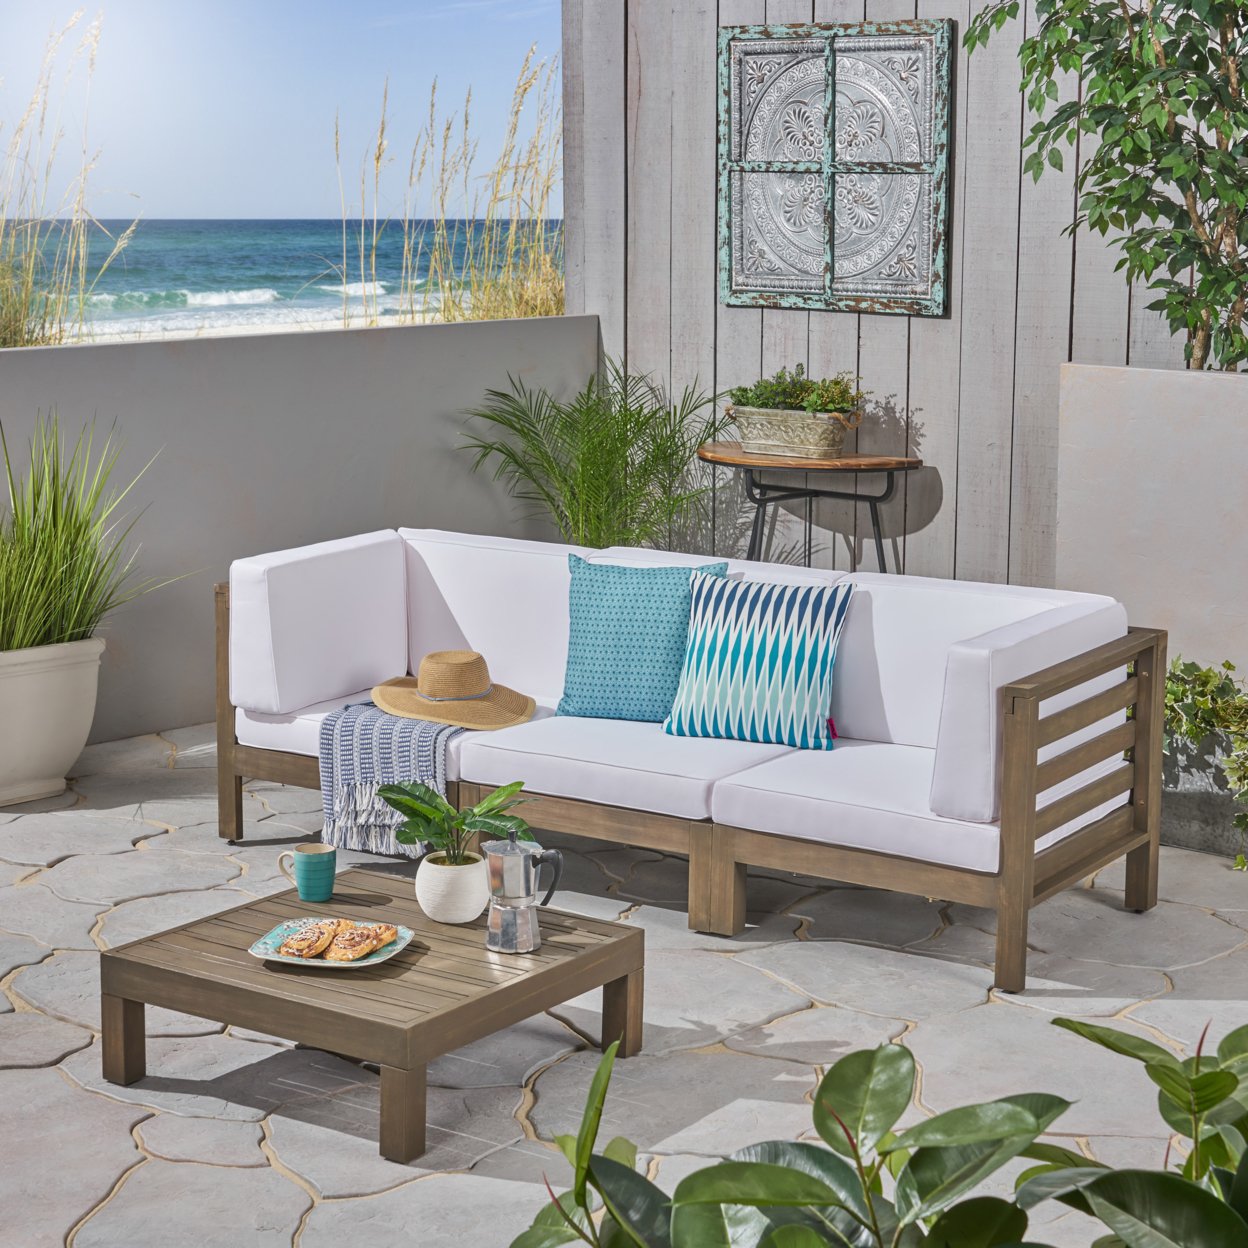 Great Deal Furniture Dawson Outdoor Sectional Sofa Set With Coffee Table - 4-Piece 3-Seater - Acacia Wood - Outdoor Cushions - Dark Gray